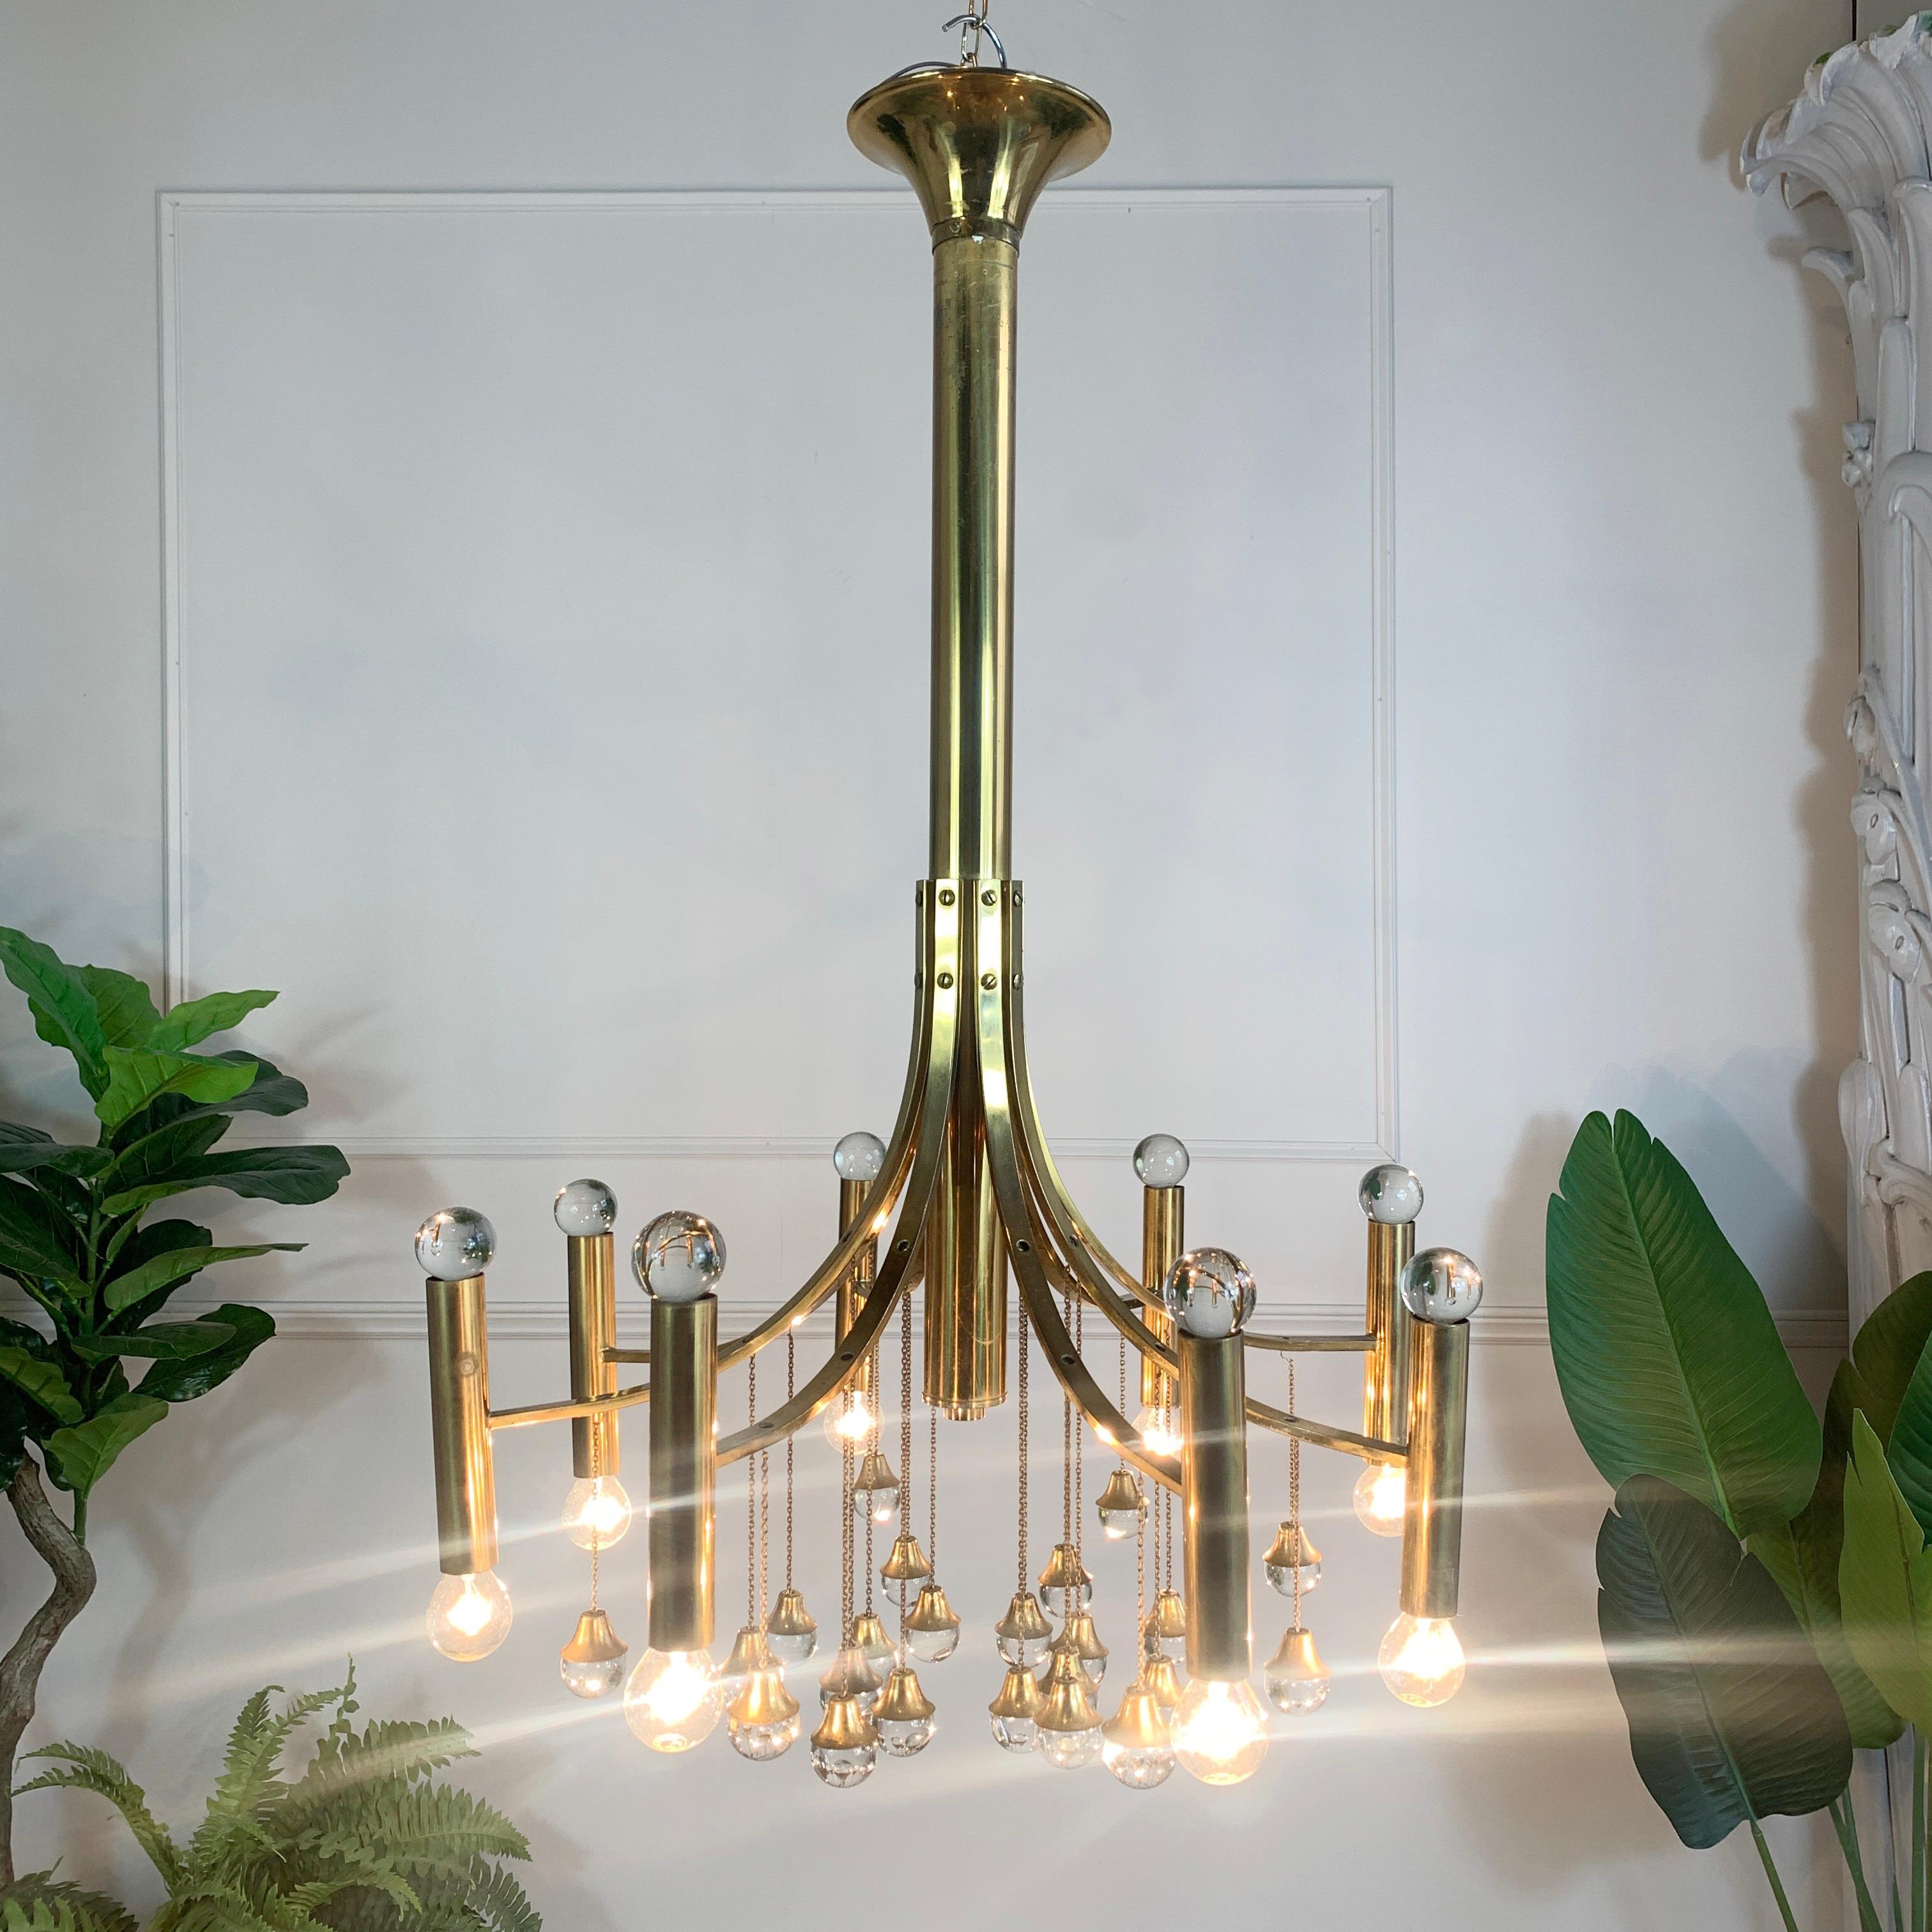 Mid-century brass chandelier
Stunning chandelier by Gaetano Sciolari, by Sciolari Lighting 1960s
The chandelier has 8 brassl arms topped with crystal spheres, eight arms hold a single bulb each, with E14 lamp holders. 

Chandelier 93cm height,